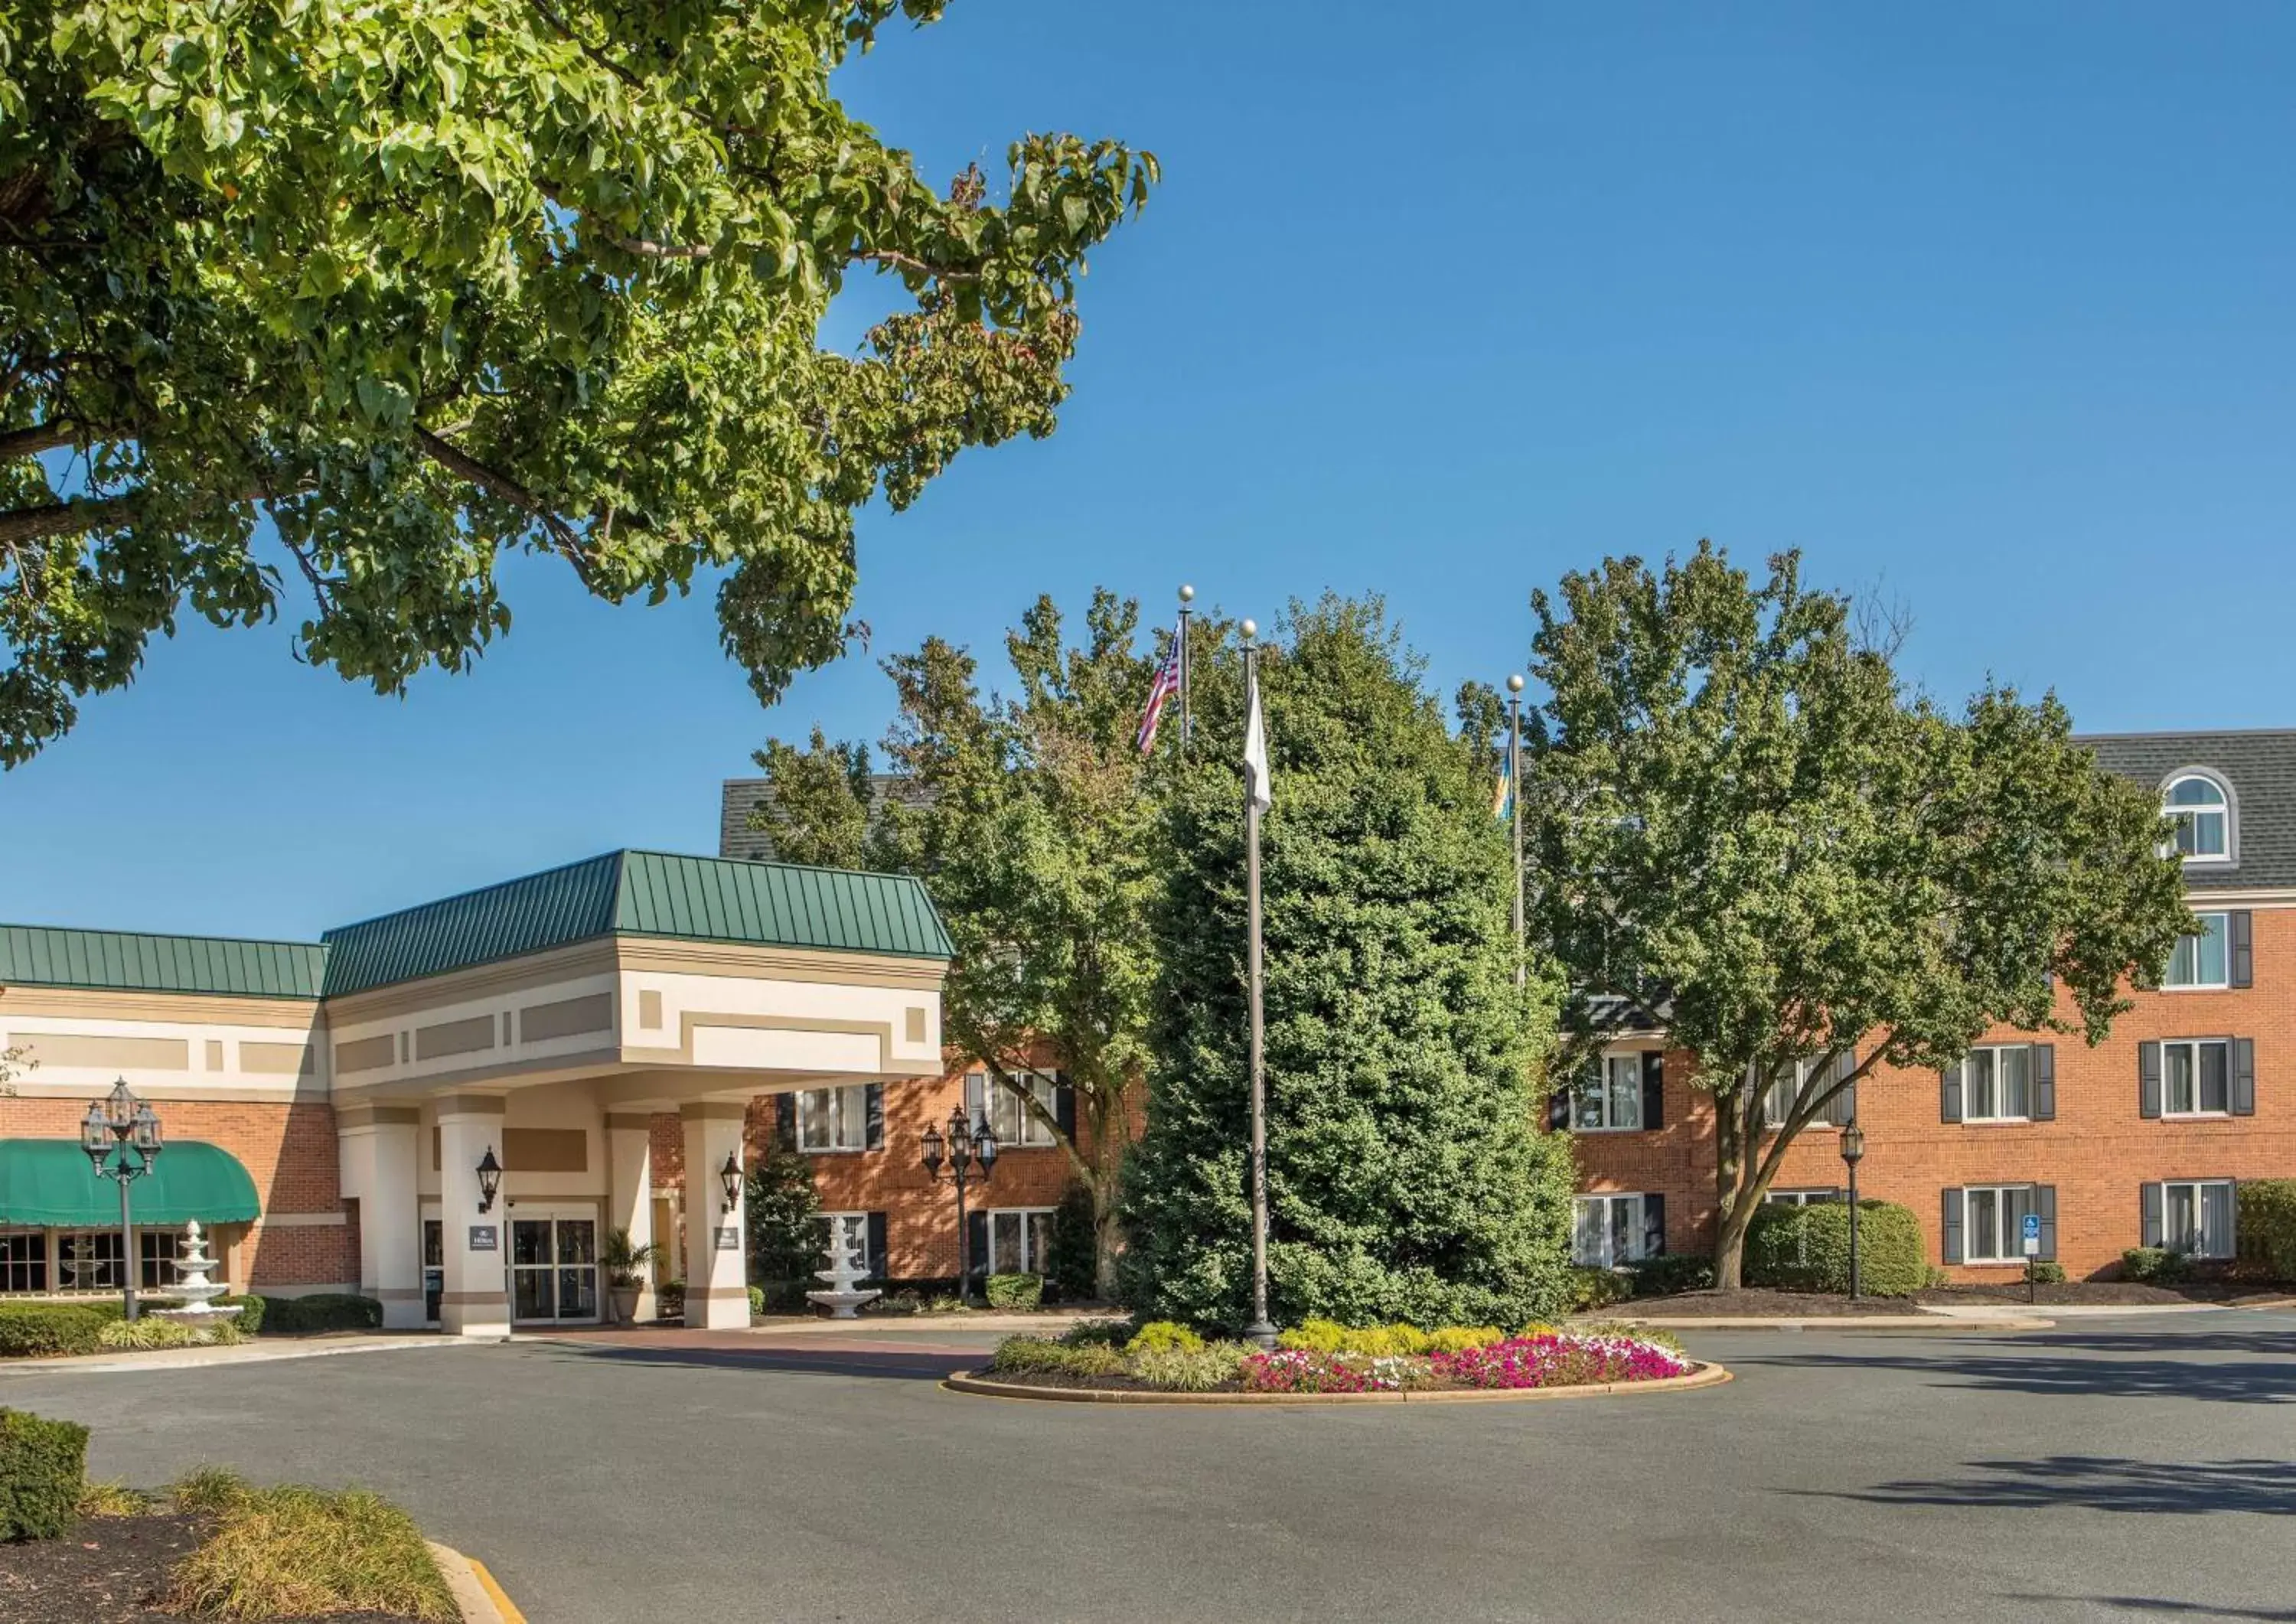 Property Building in Hilton Wilmington/Christiana